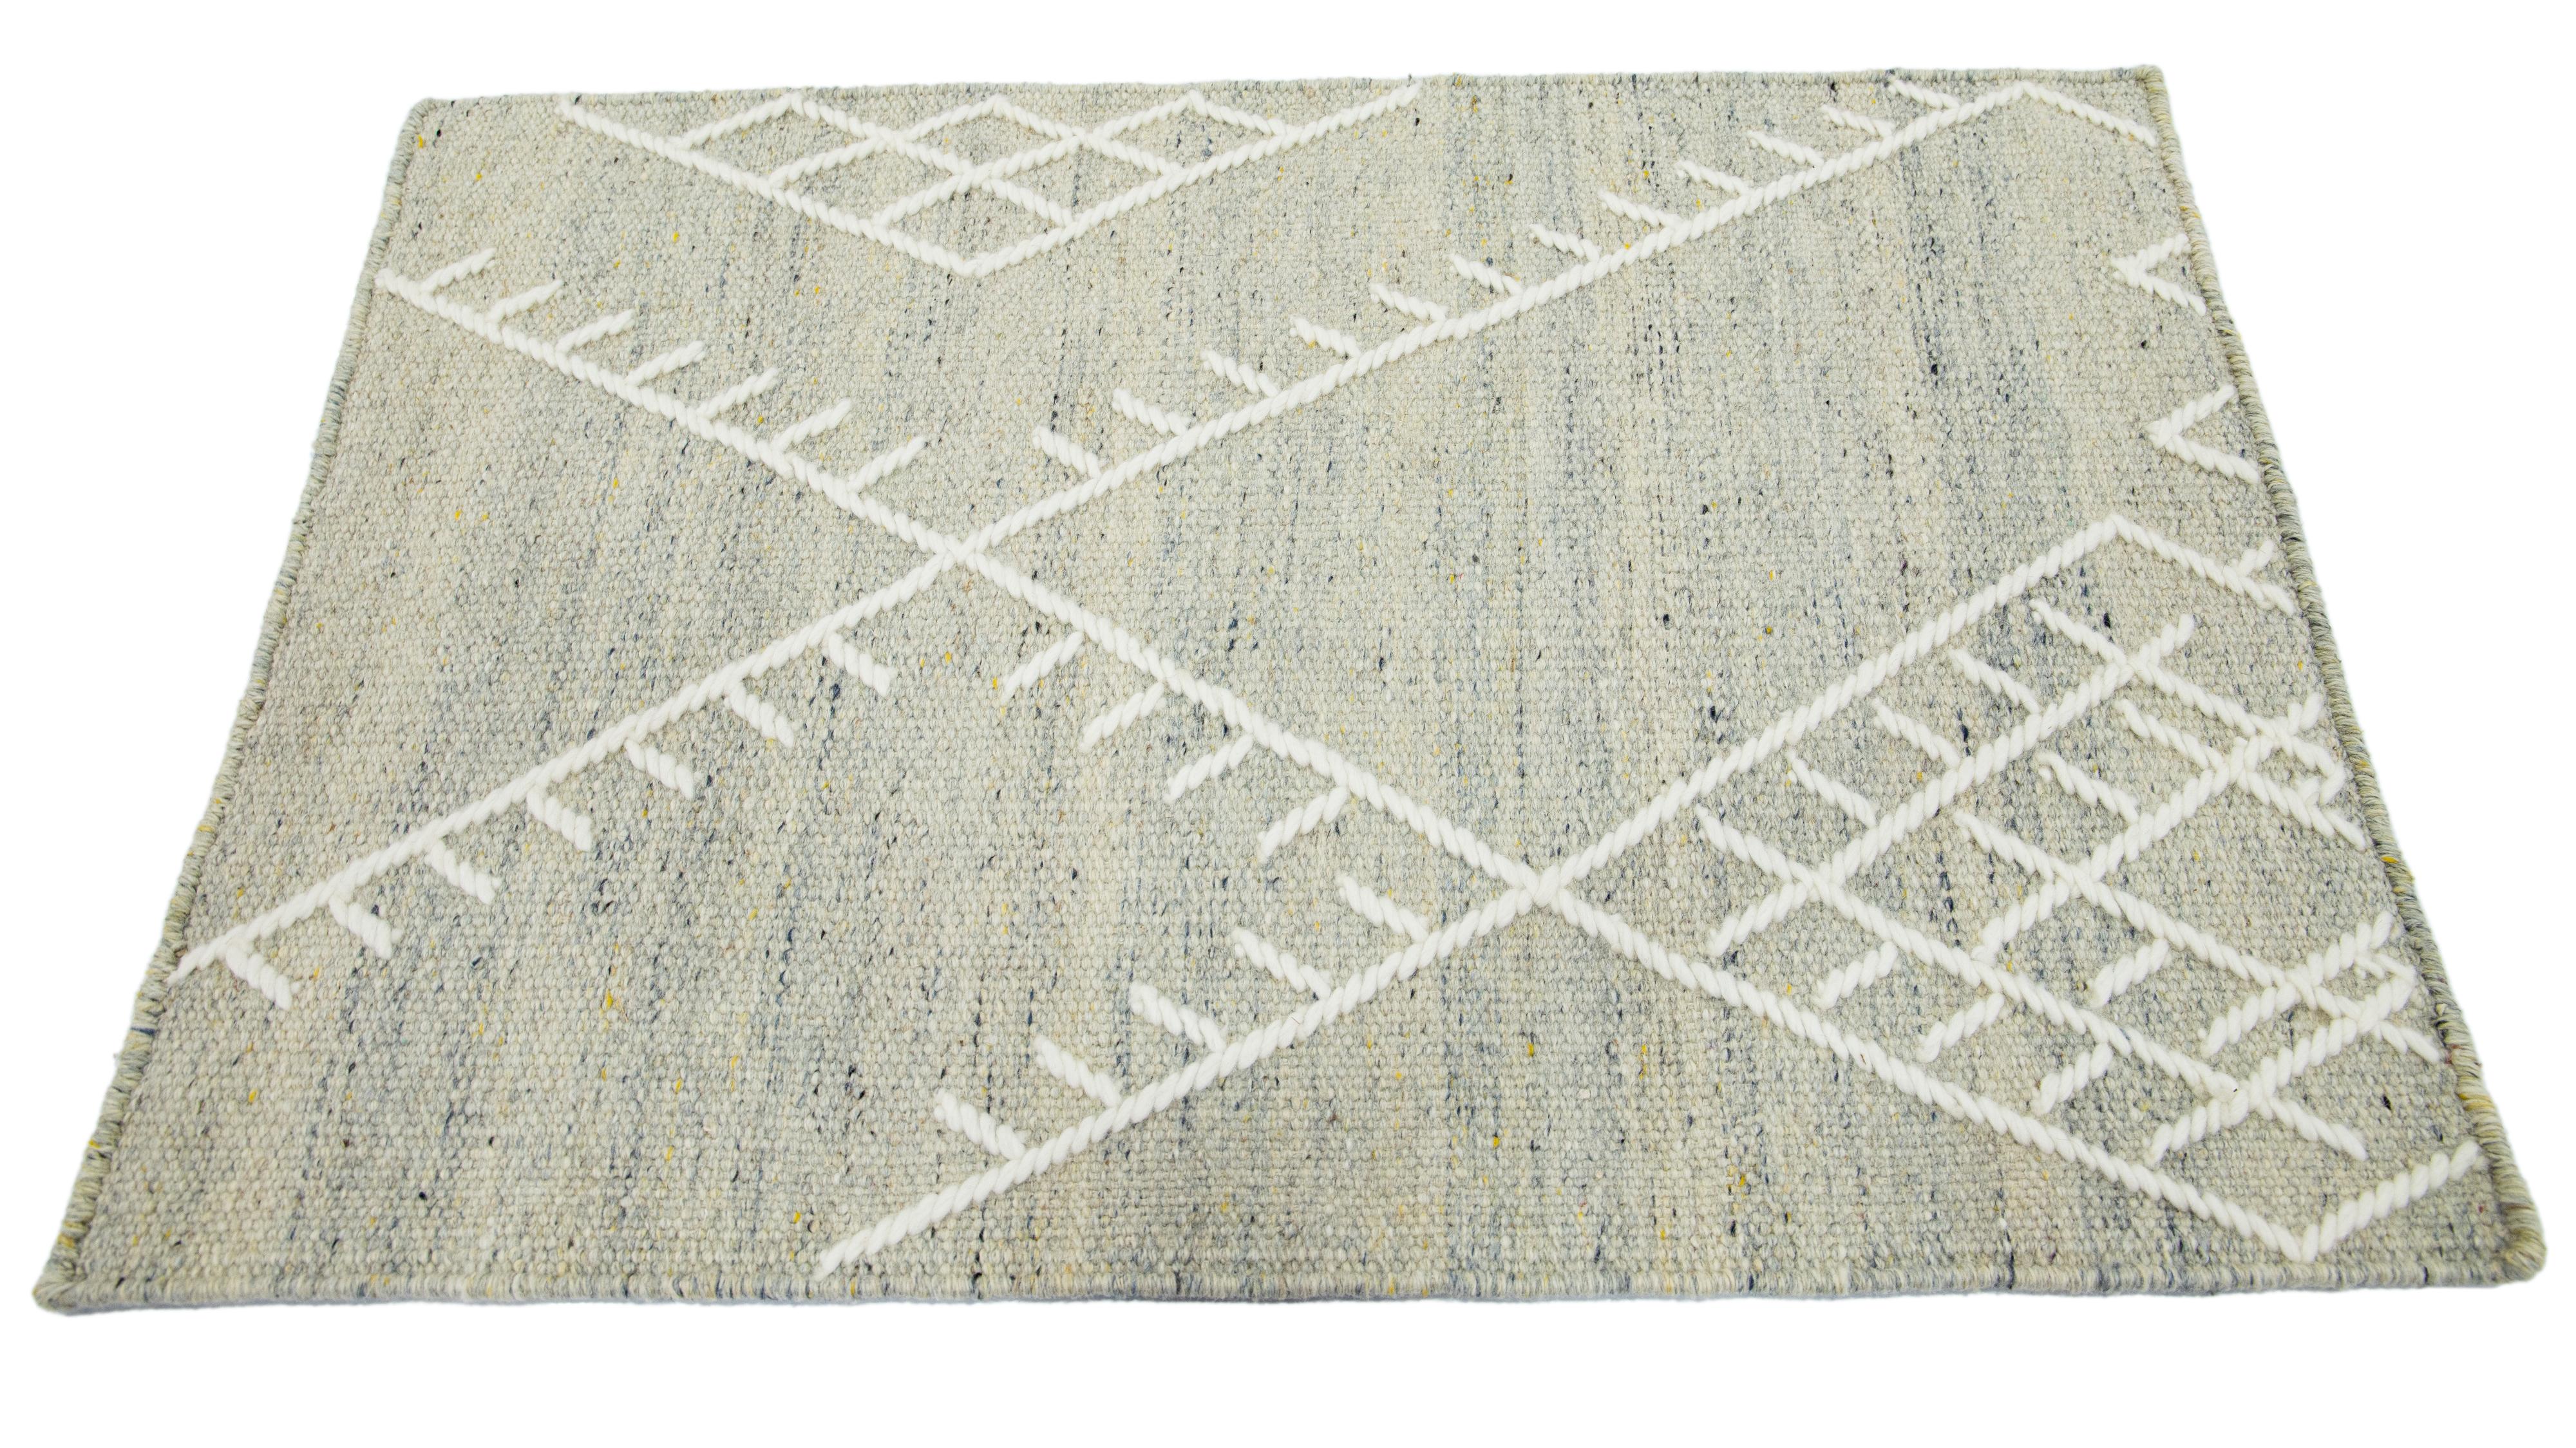 Apadana's Nantucket Collection wool custom rug. Custom sizes and colors made-to-order. 

Material: Wool 
Techniques: Flatweave
Style: Geometric-Coastal
Lead time: Approx. 15-16 wks available 
Colors: As shown, other custom colors are available.